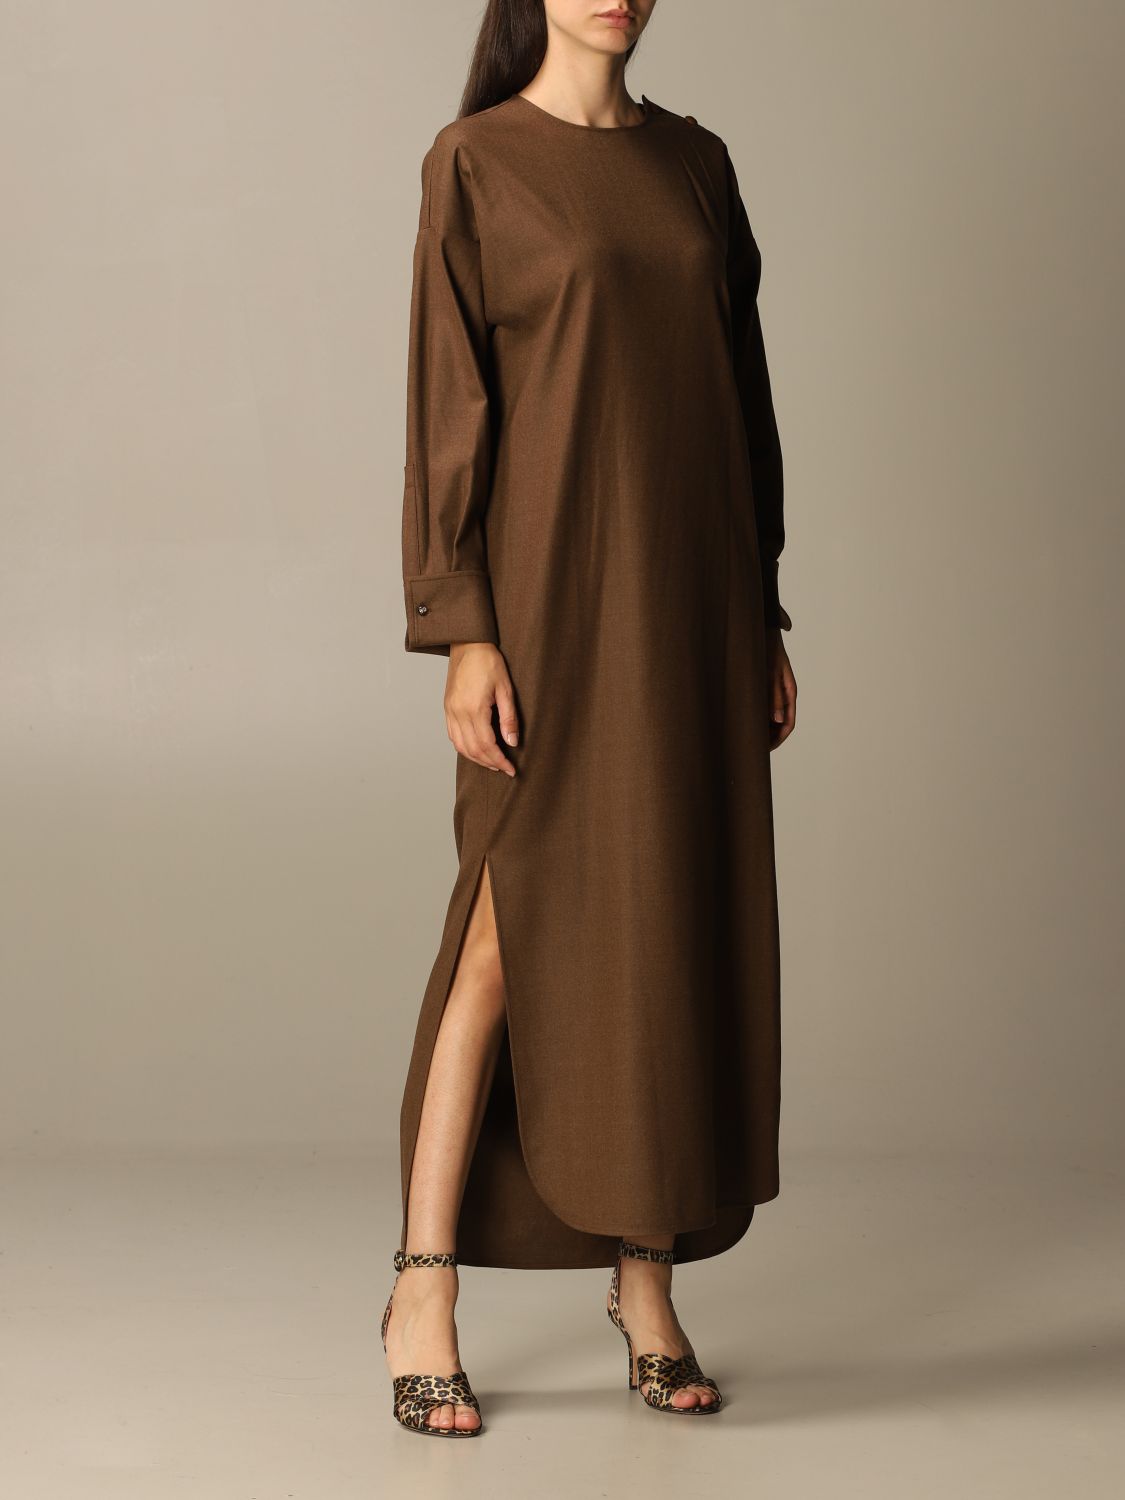 Max Mara Outlet: Venusia dress in wool flannel - Leather | Max Mara ...